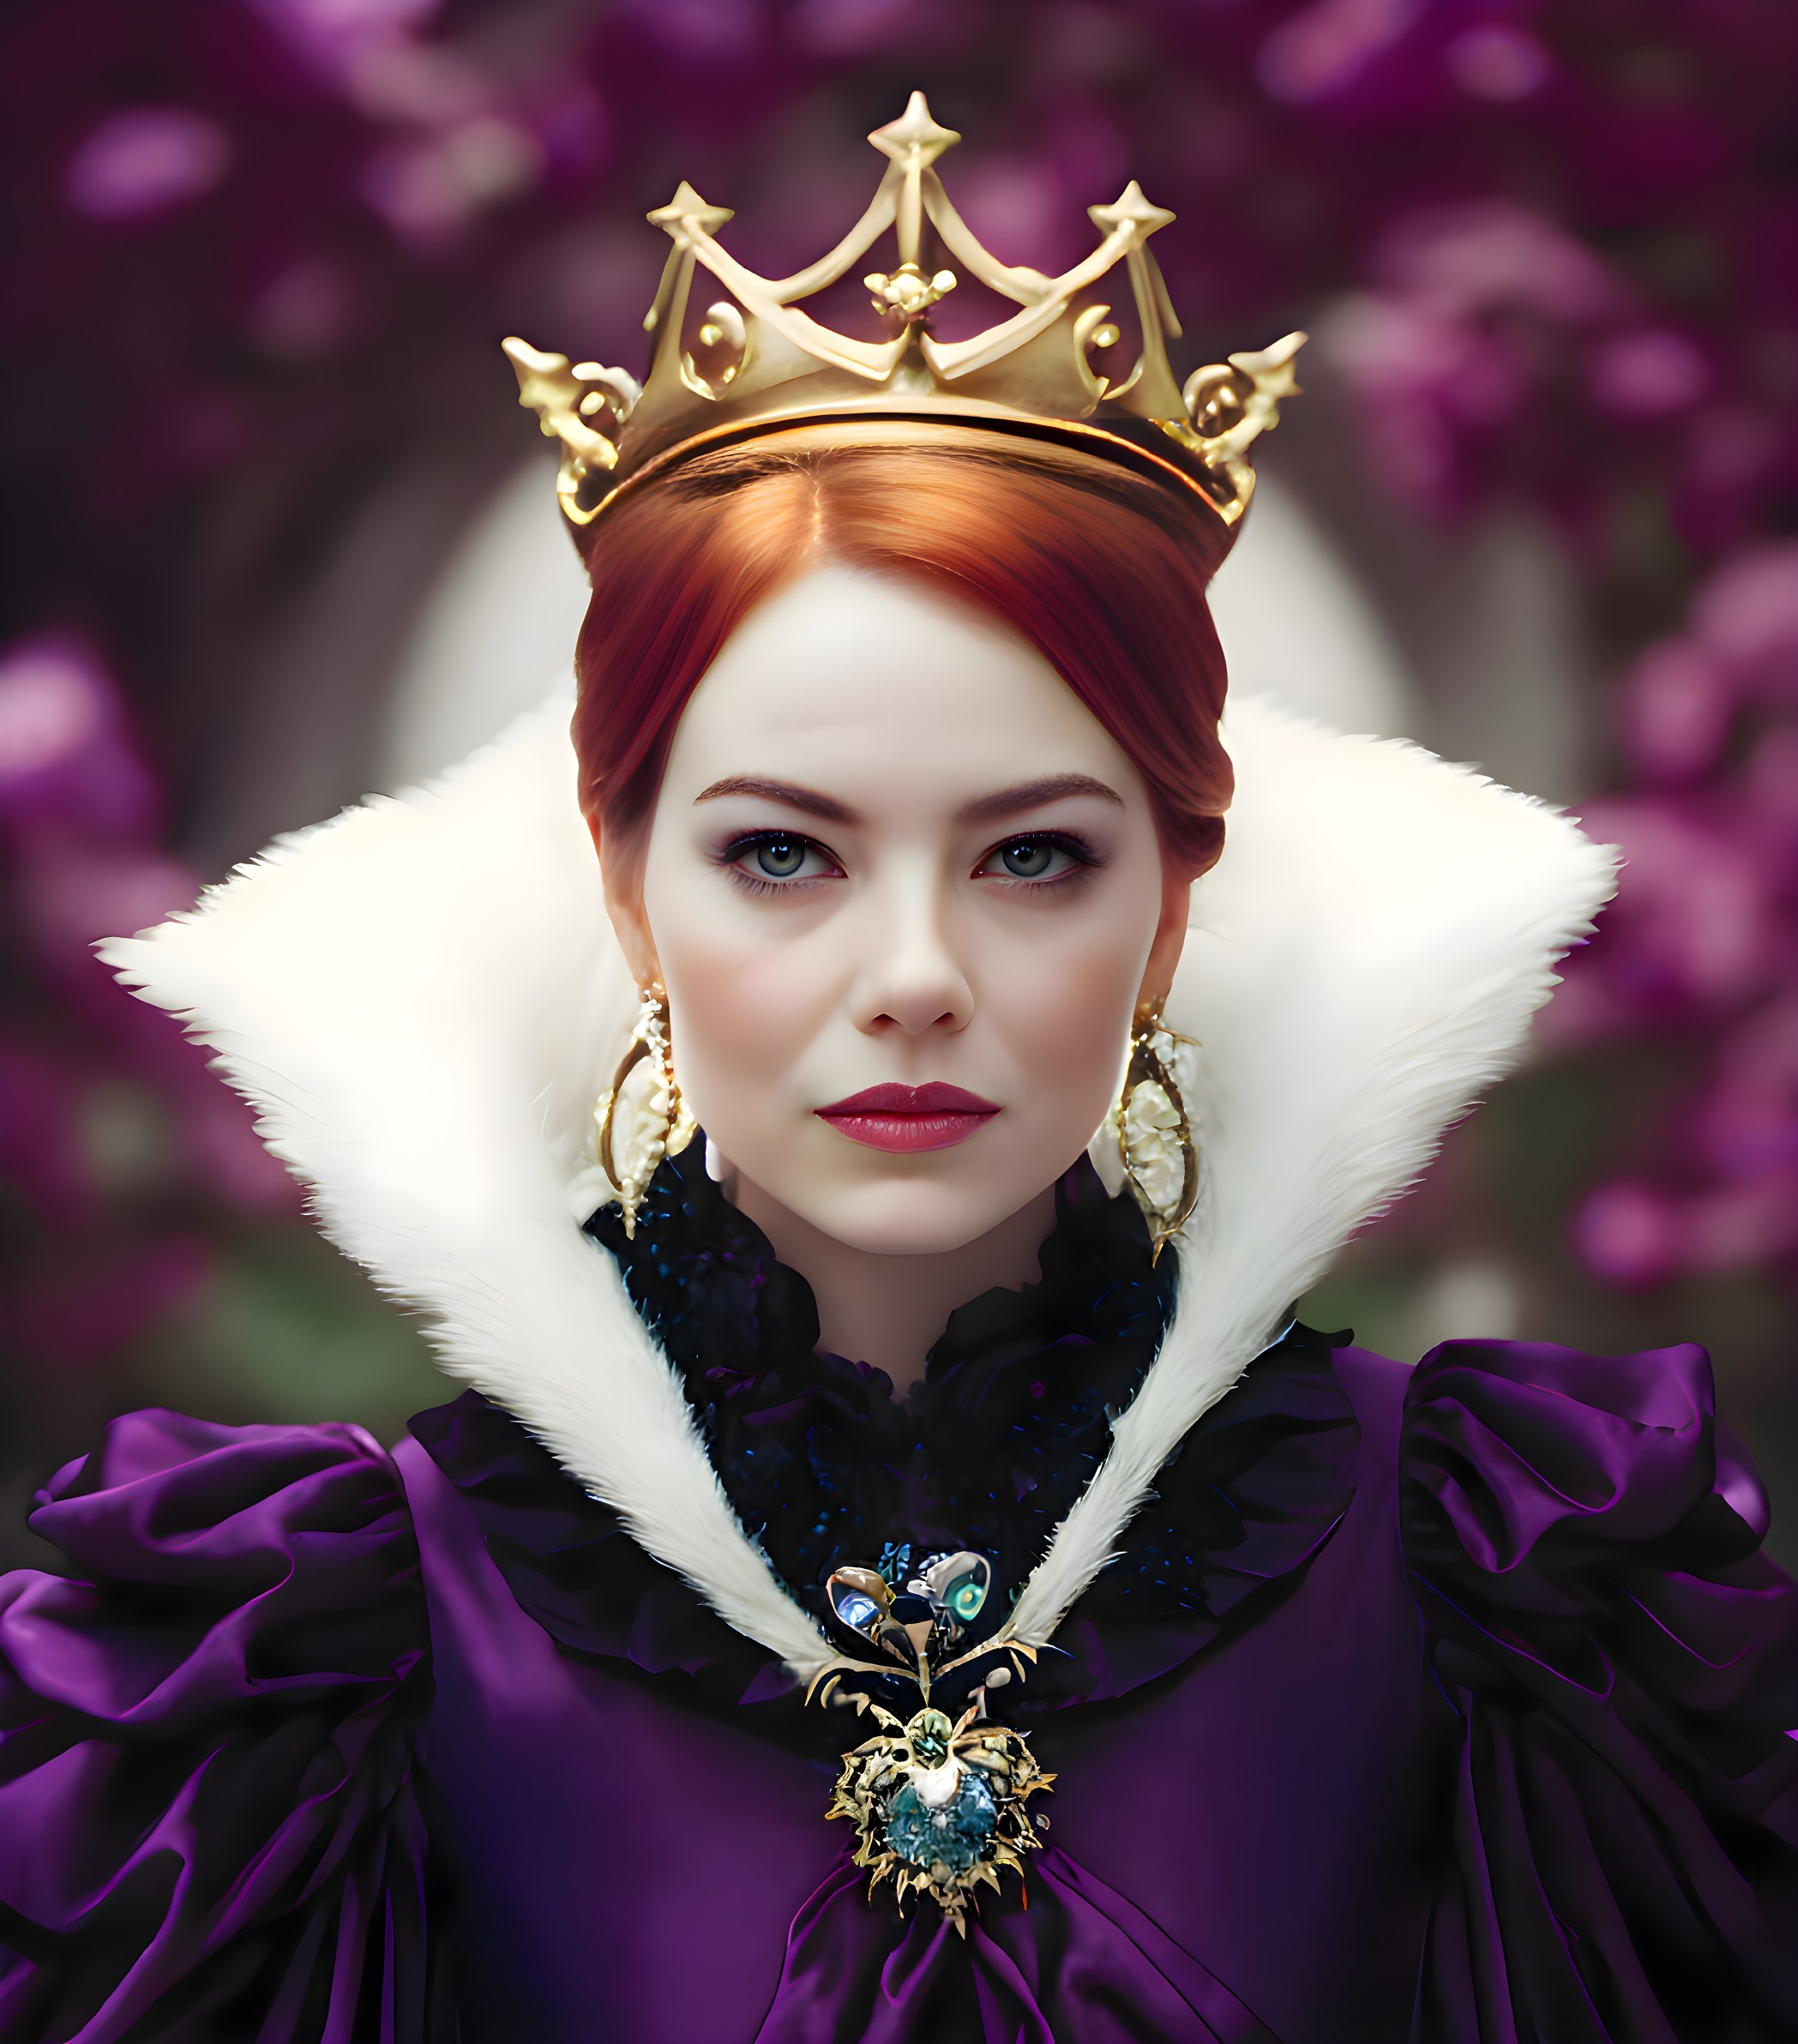 ANDRE´S ART EMMA STONE AS PRINCESS EVIL QUEEN